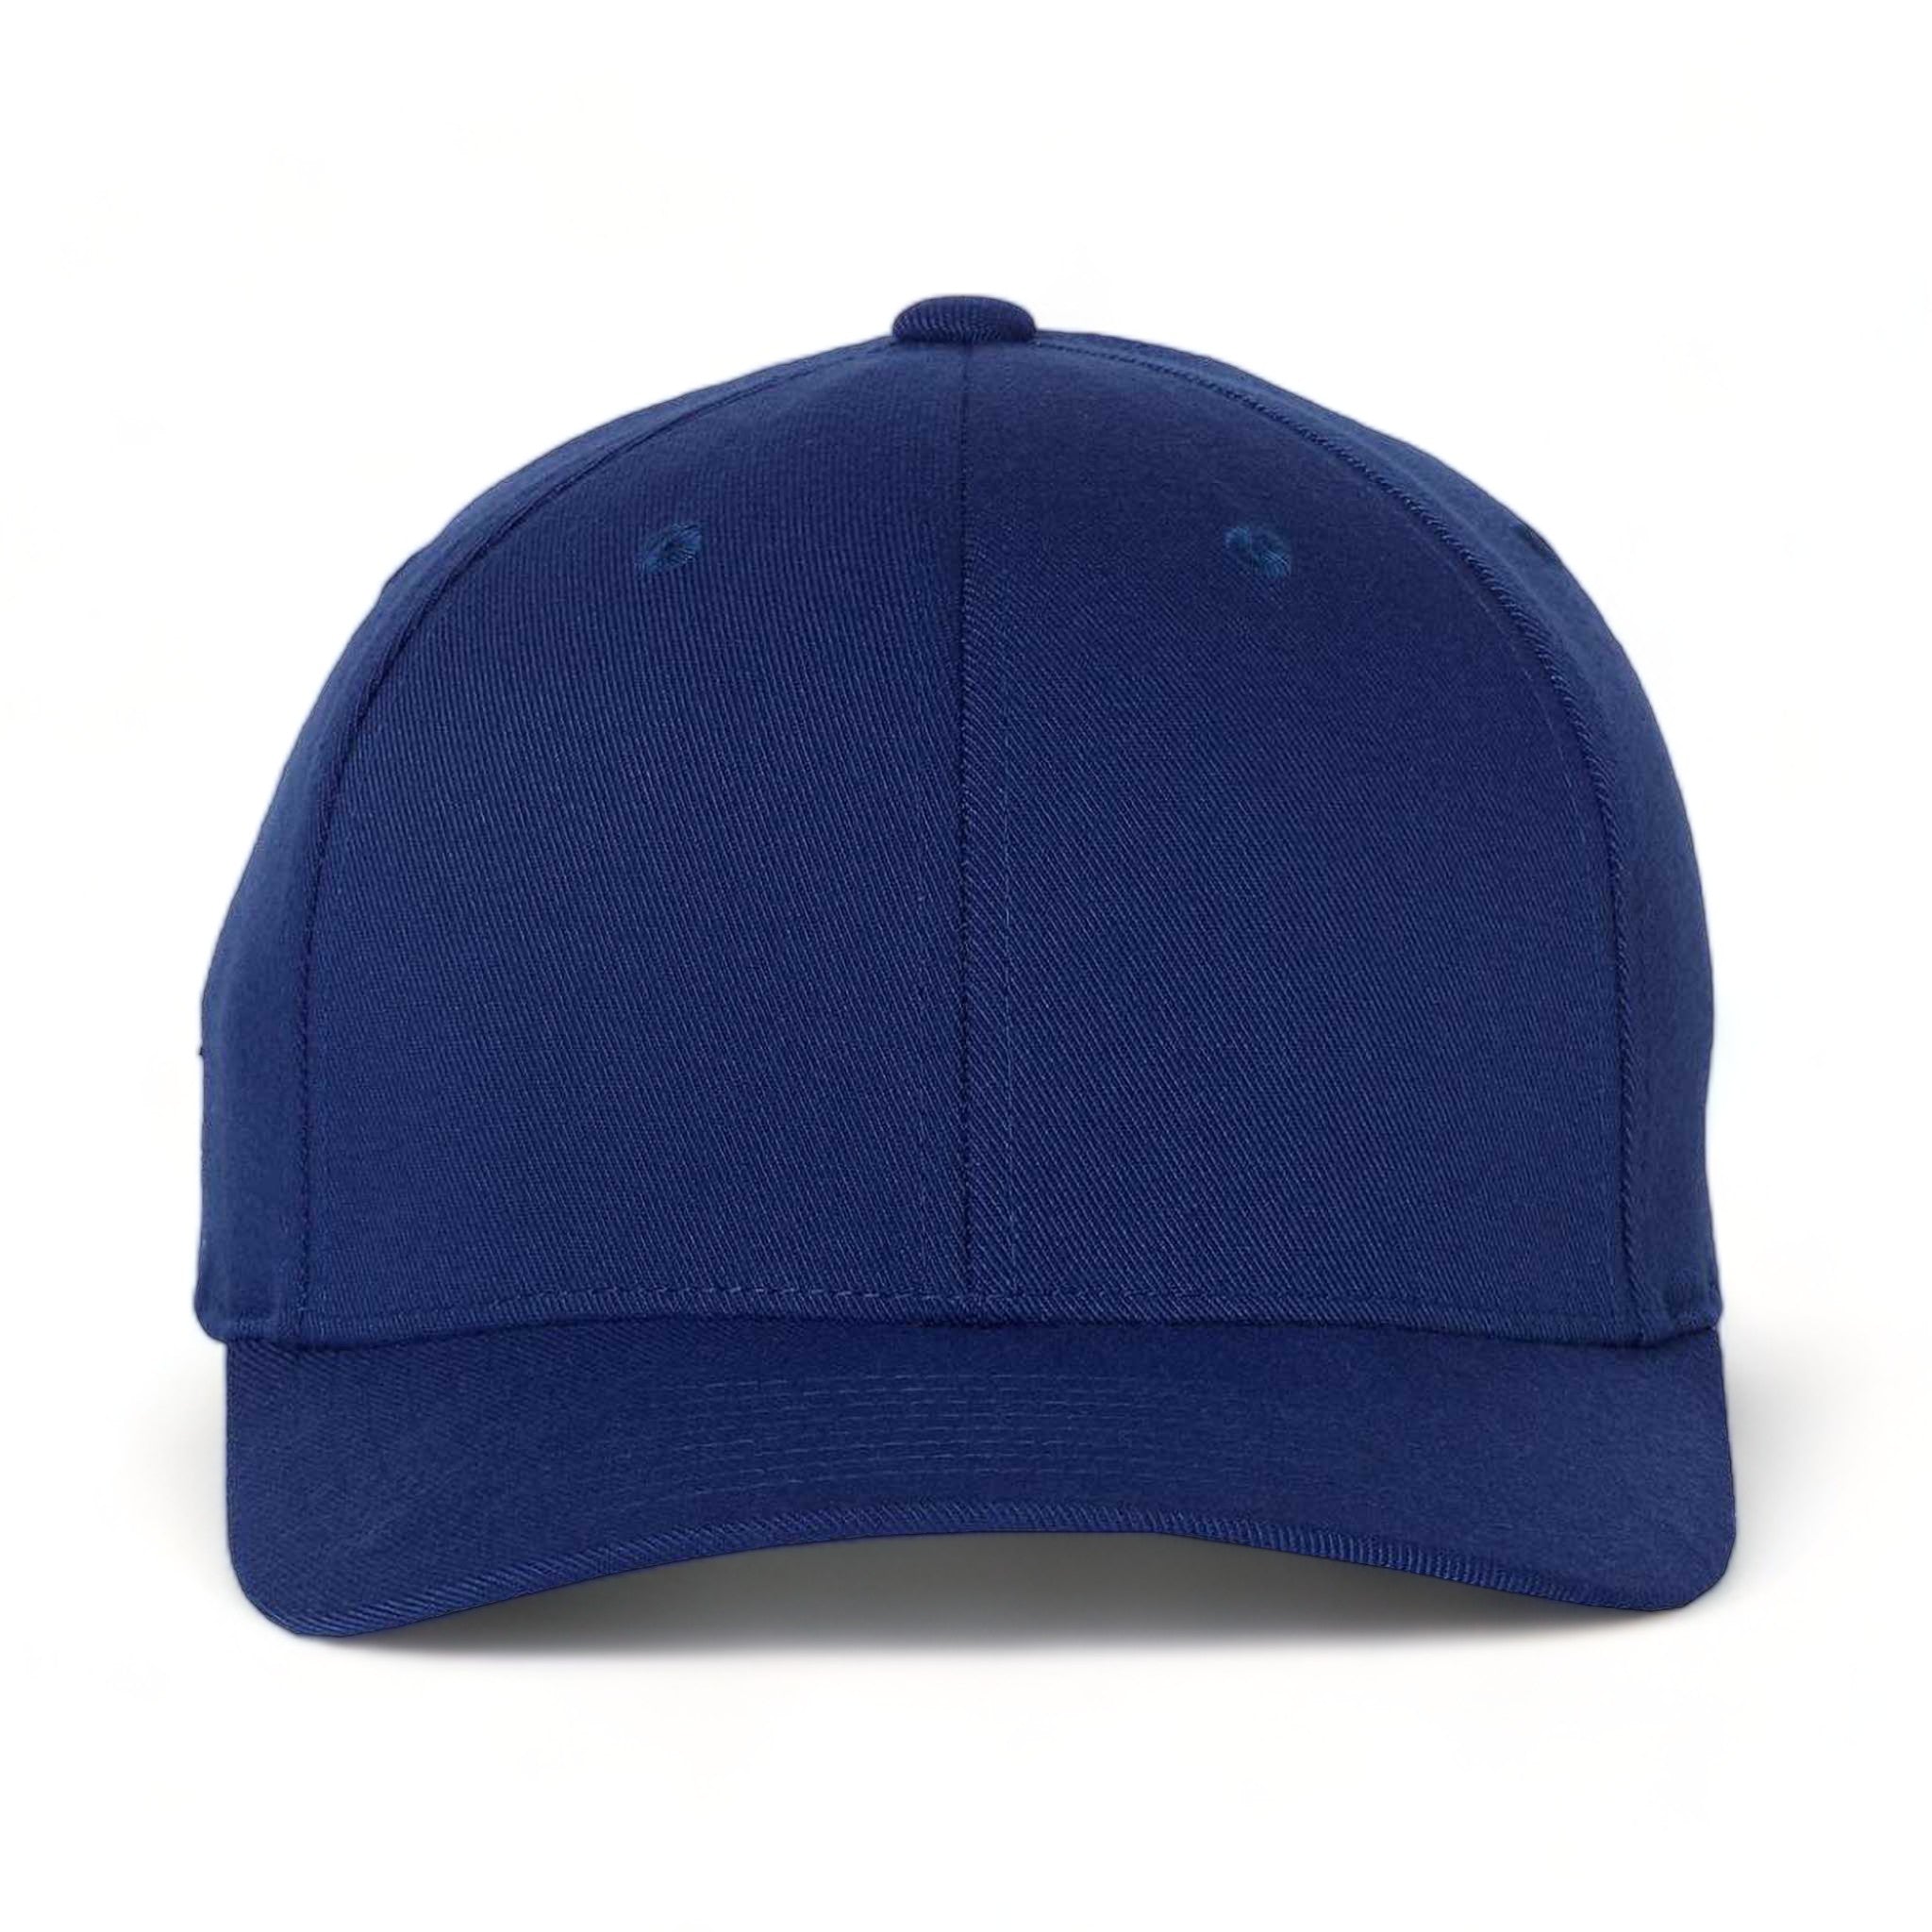 Front view of Flexfit 6580 custom hat in royal blue